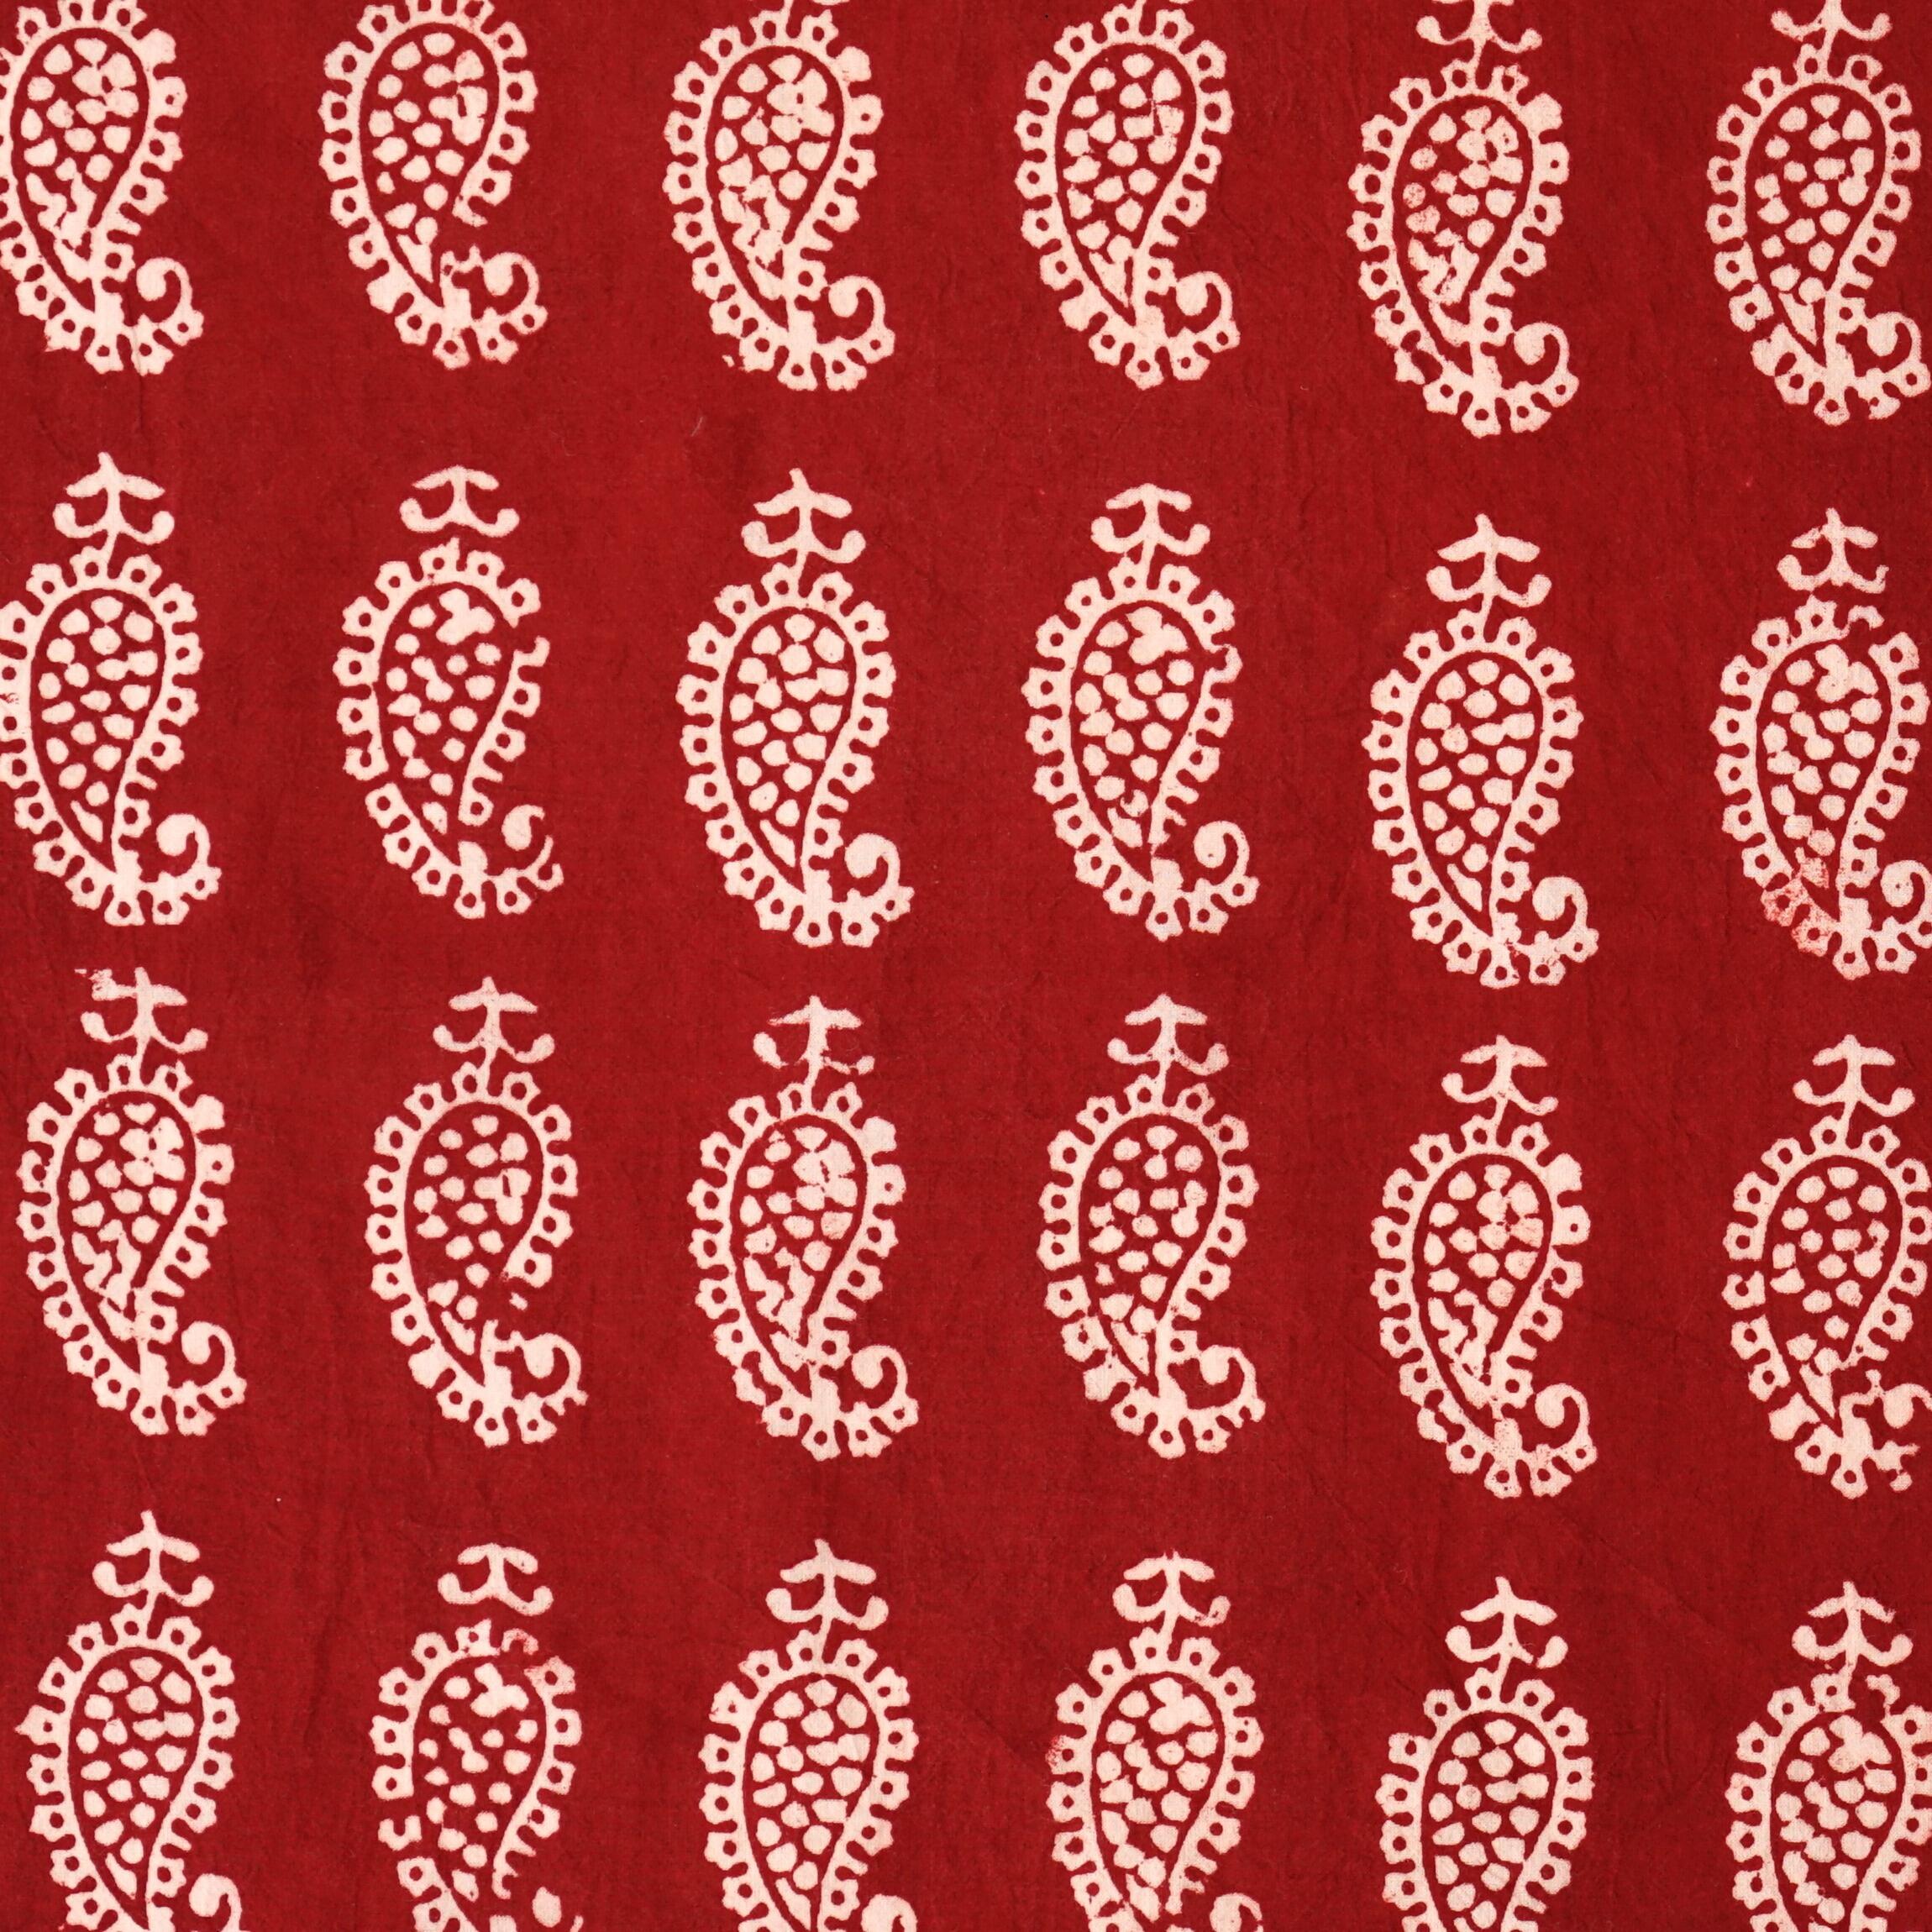 100% Block-Printed Cotton Fabric From India - Raindrops Design - Iron Rust Black & Alizarin Red Dyes - Flat